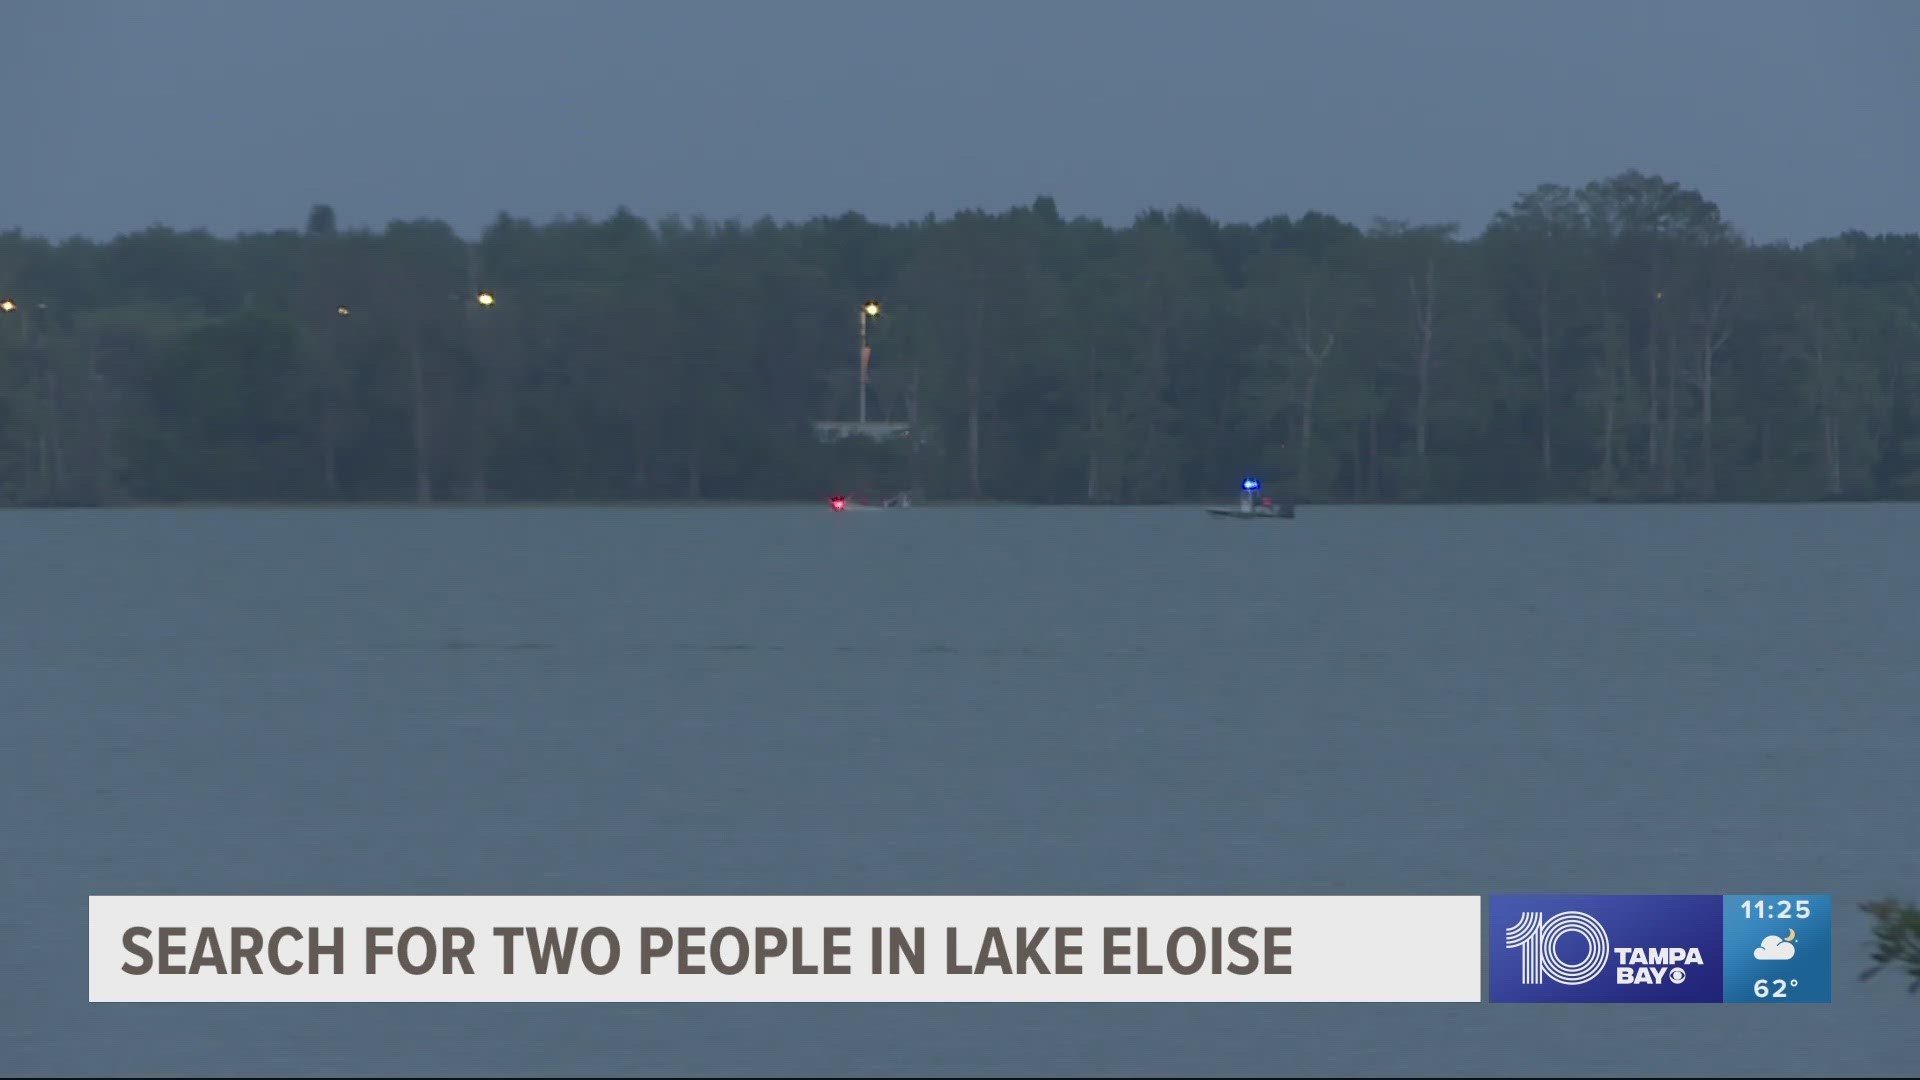 A statement from the nearby theme park, Legoland, said a boating incident happened on Lake Eloise Saturday.